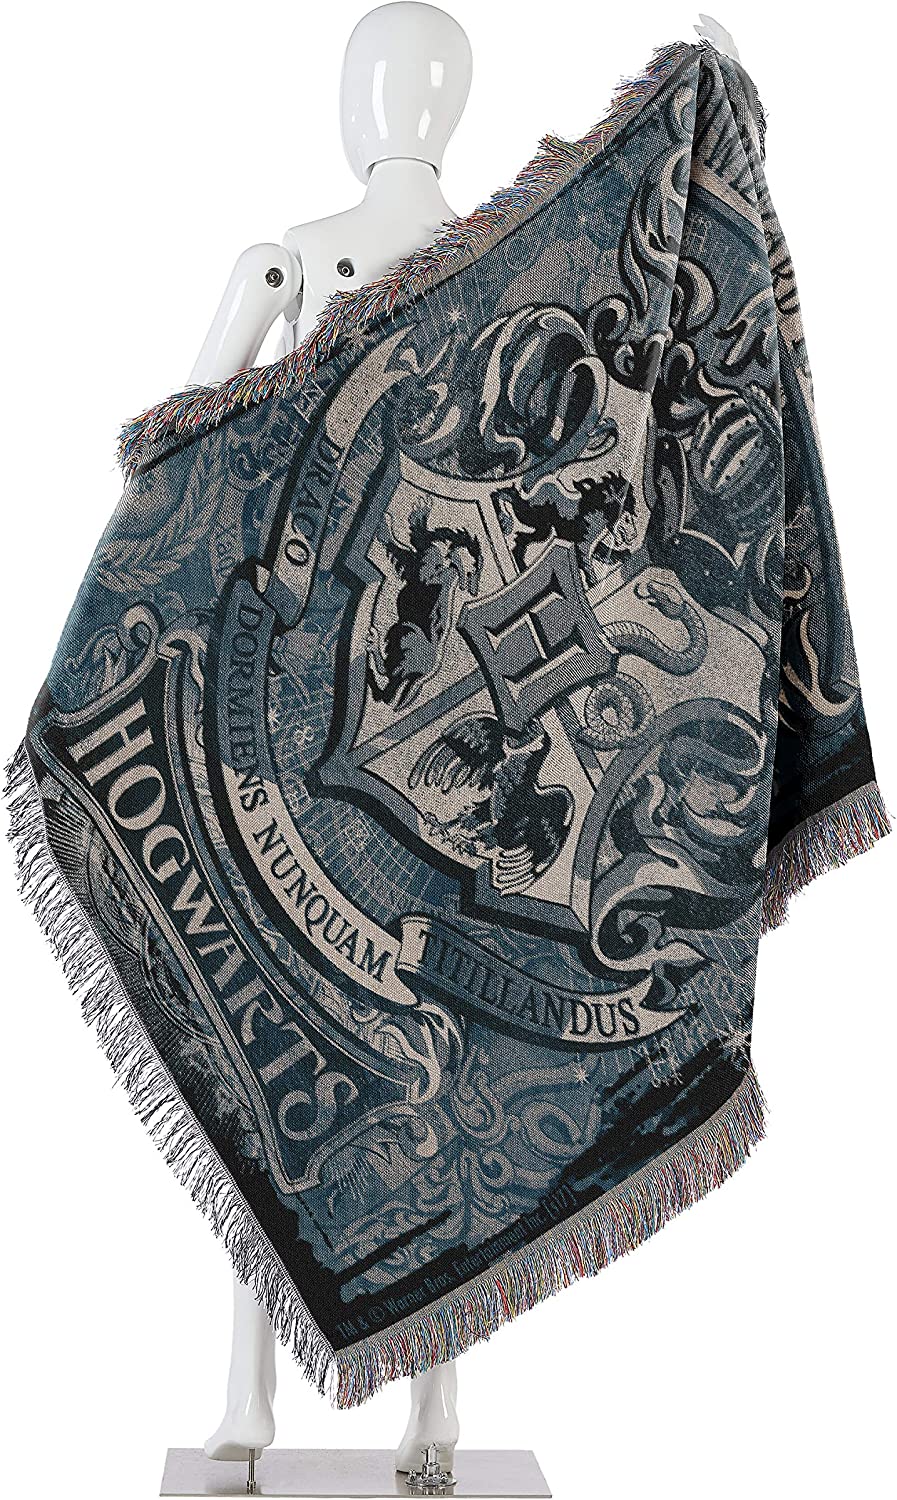 Triwizard Tournament (Harry Potter) Woven Tapestry Throw Blanket